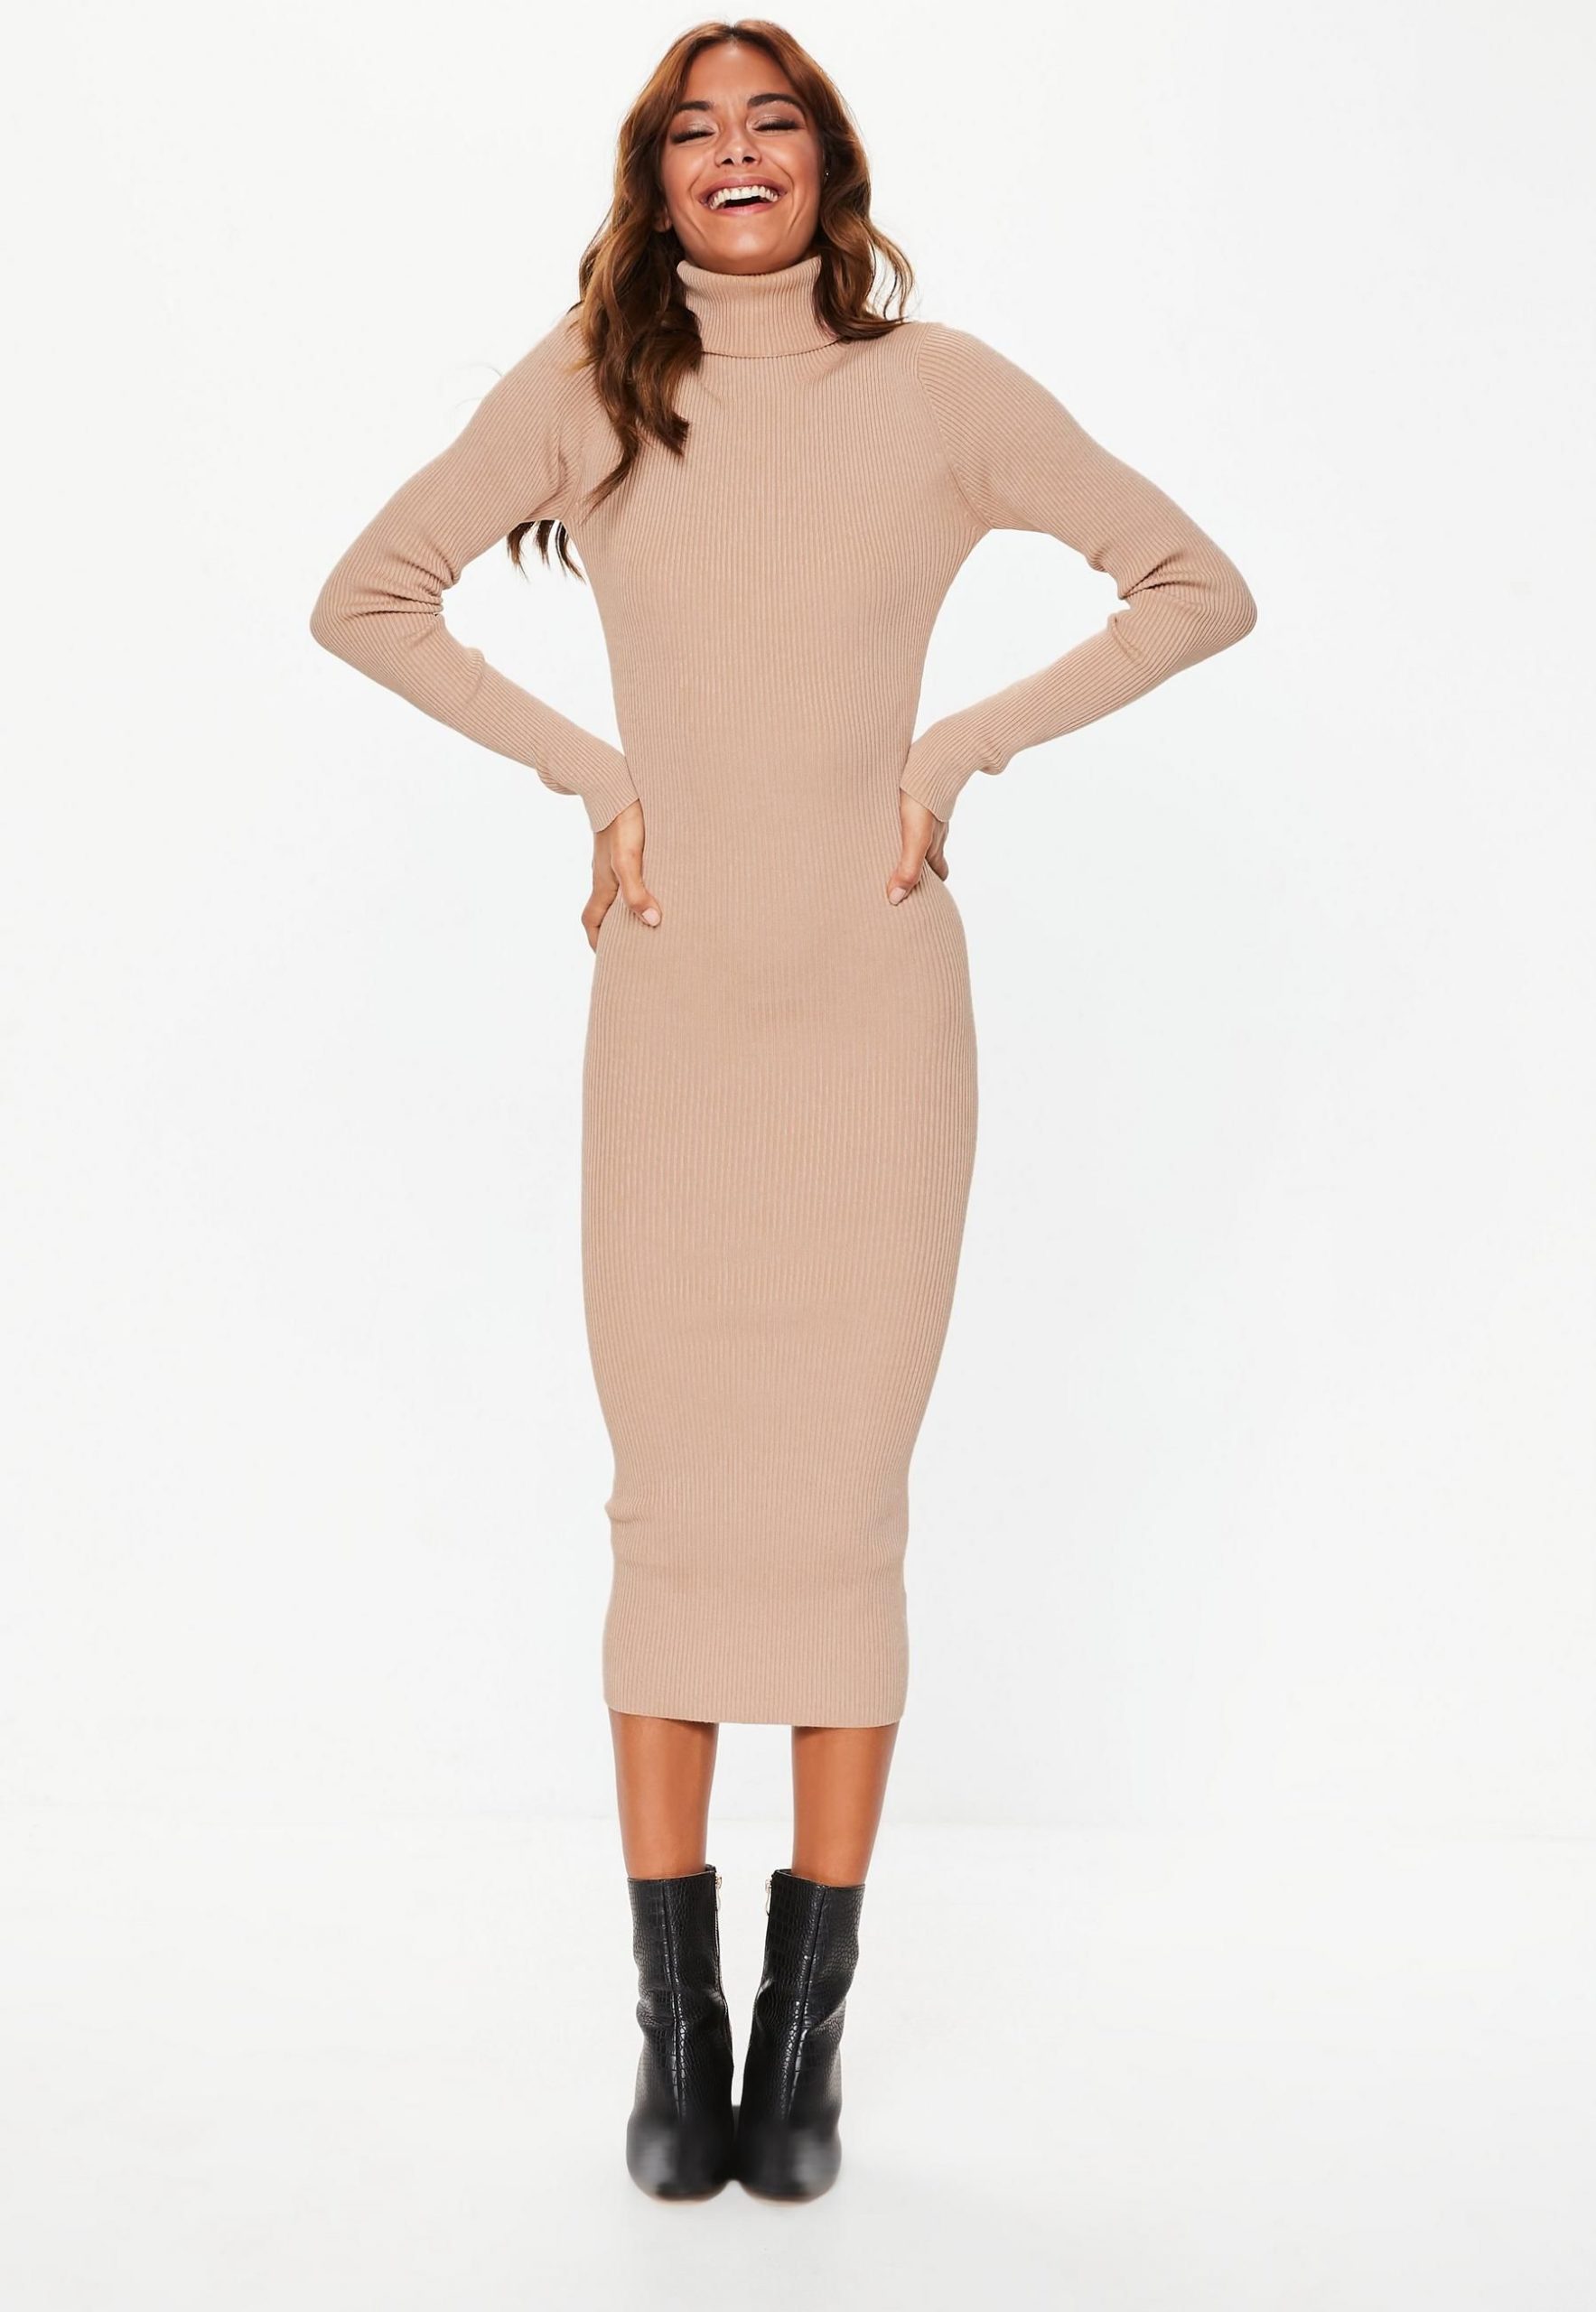 How To Choose A Knitted Midi Dress For A Special Occasion The Streets Fashion And Music